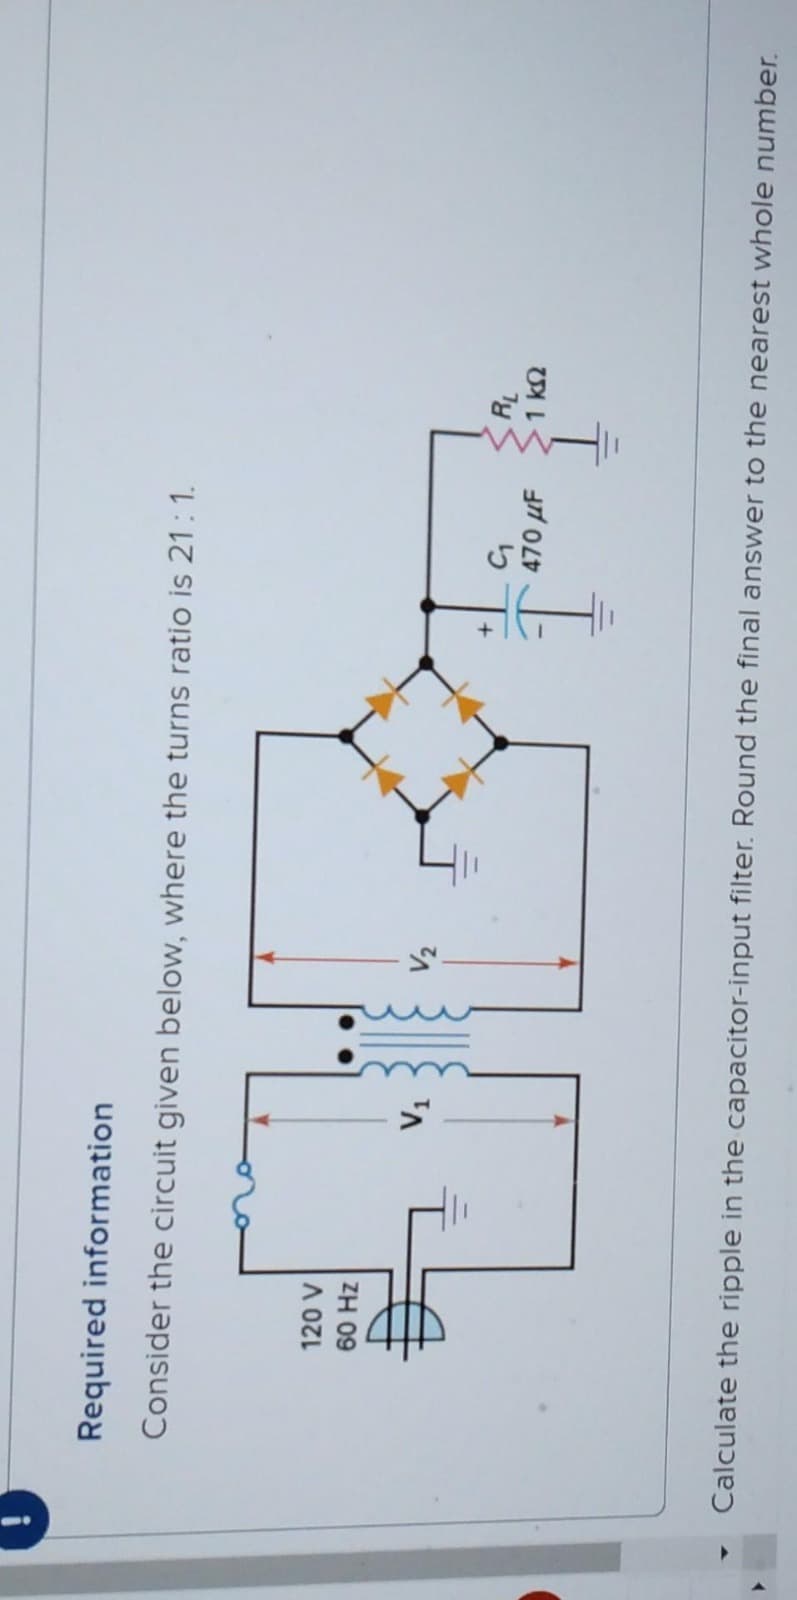 Required information
Consider the circuit given below, where the turns ratio is 21:1.
120 V
60 Hz
V₁
G₁
470 μF
ļ
RL
1 ΚΩ
Calculate the ripple in the capacitor-input filter. Round the final answer to the nearest whole number.